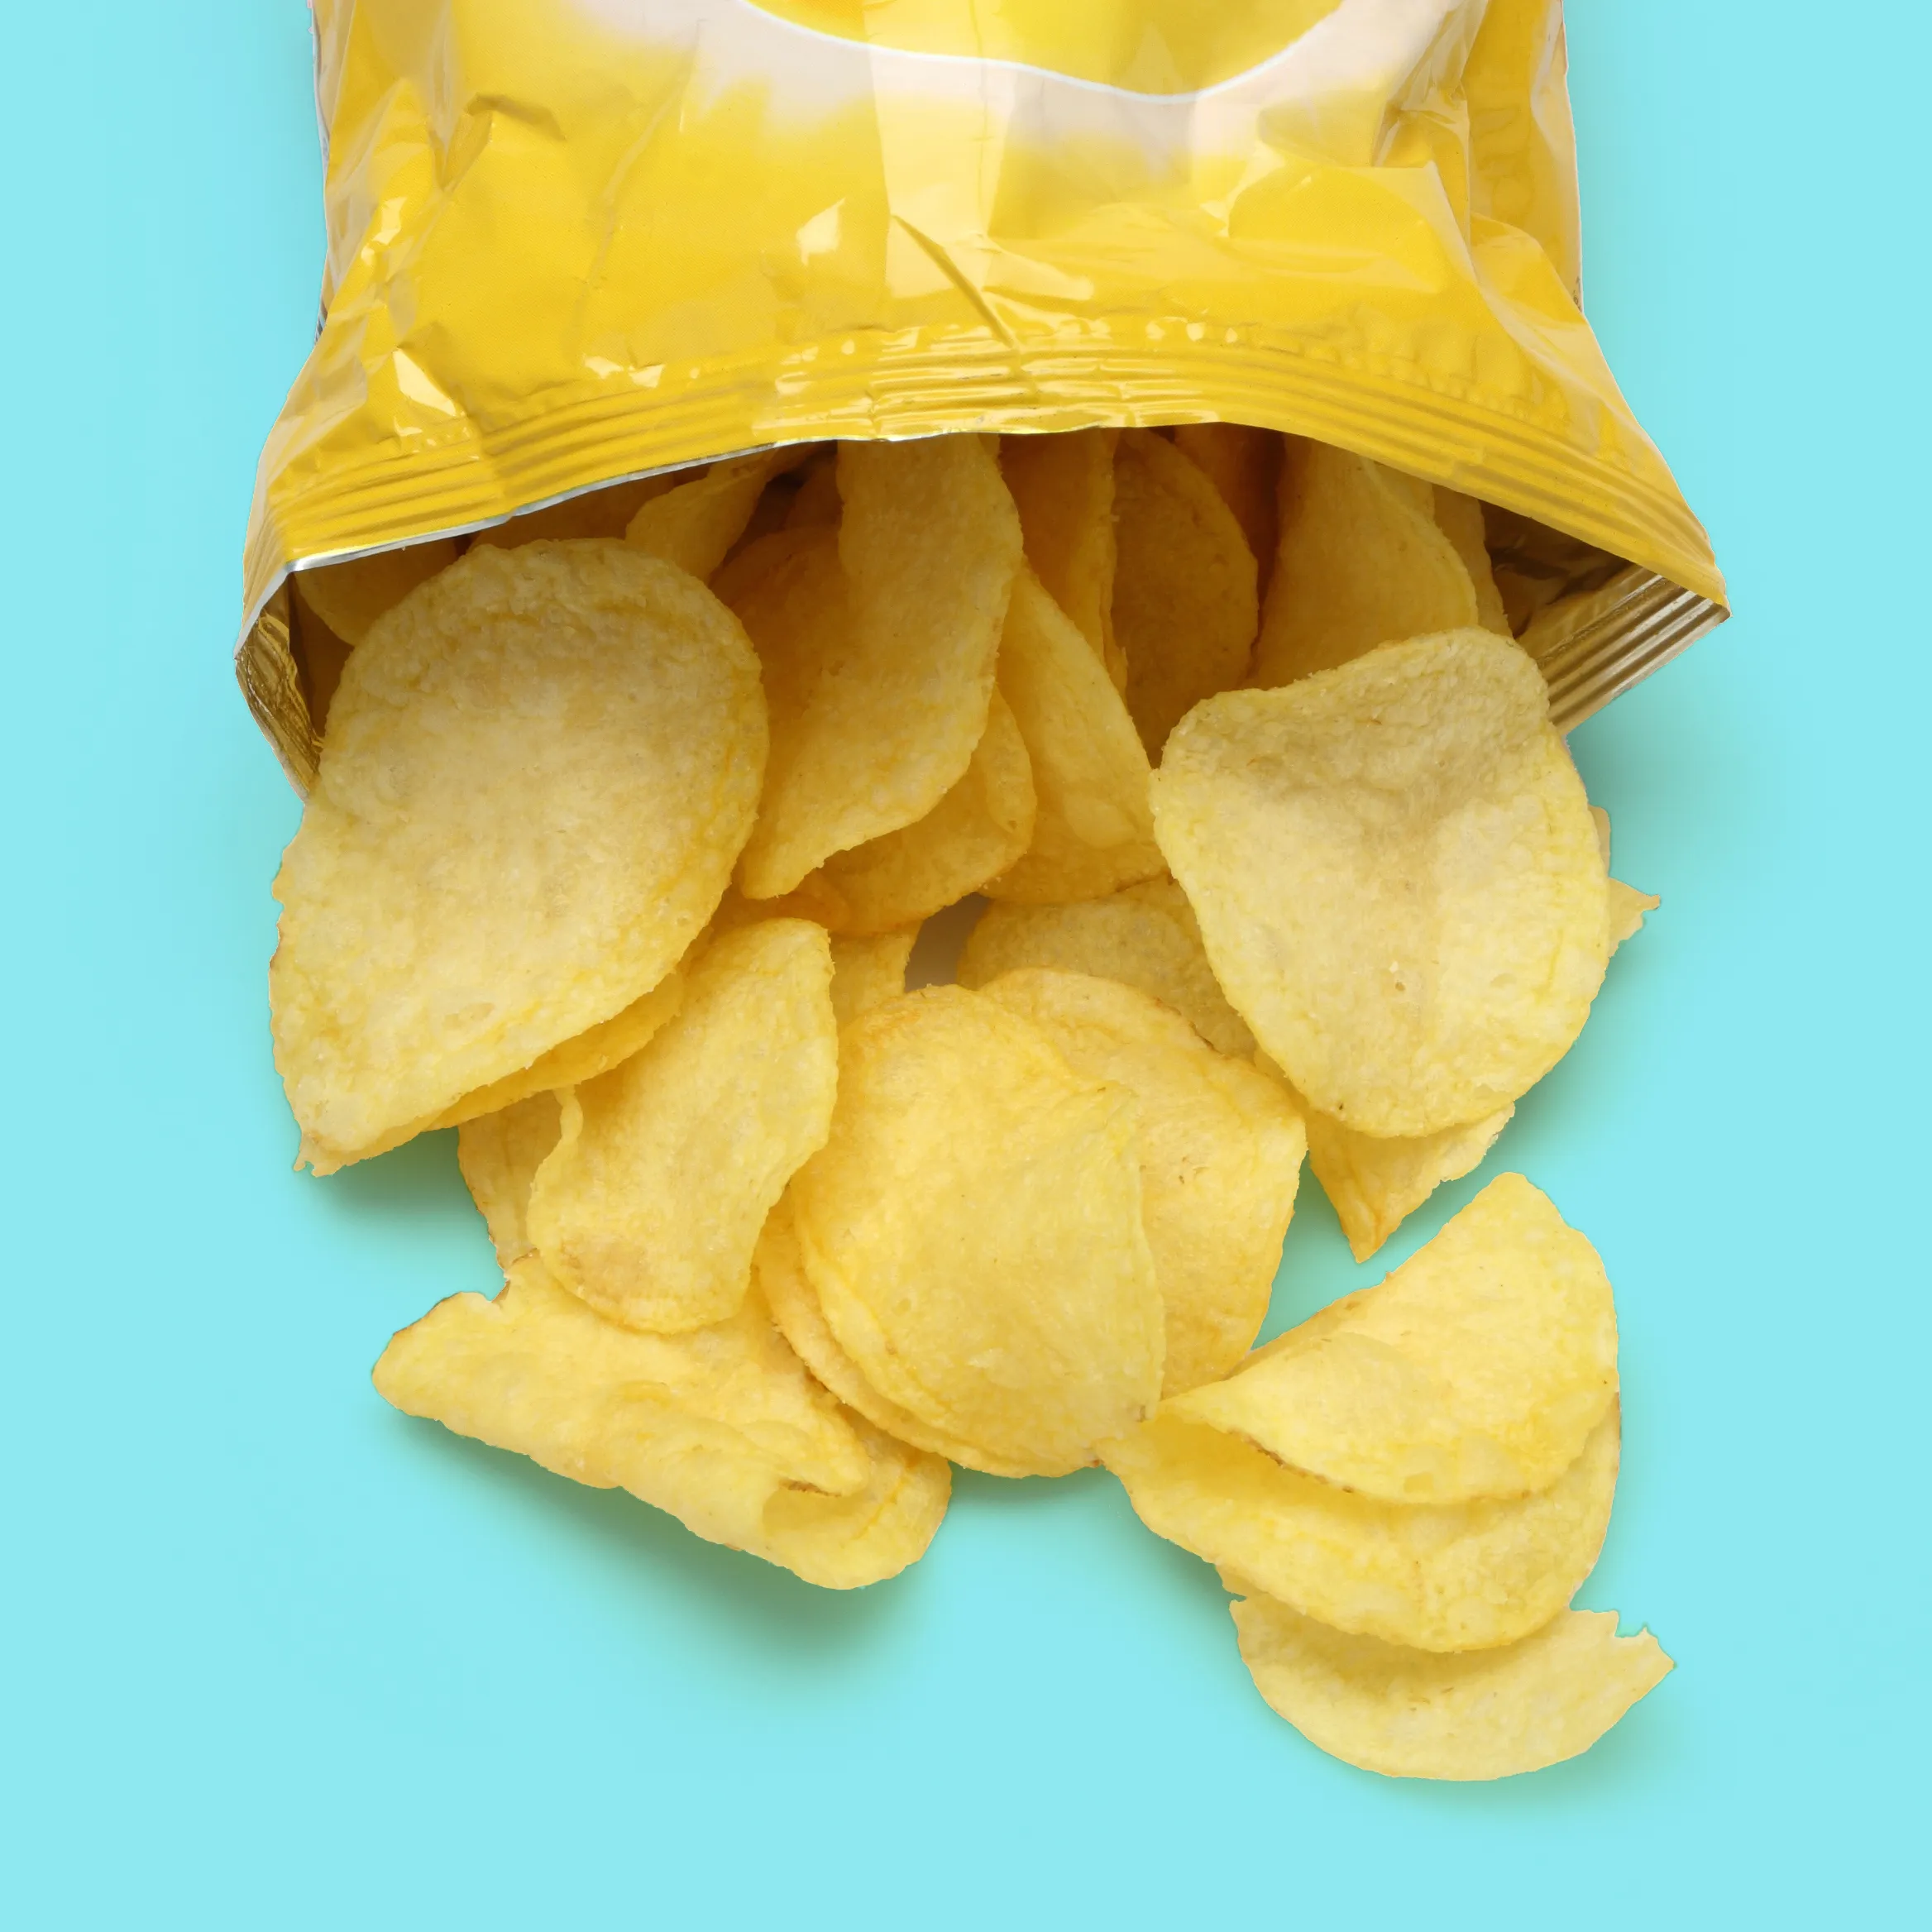 How Many Chips Are Actually in Your Favorite Chip Bags?